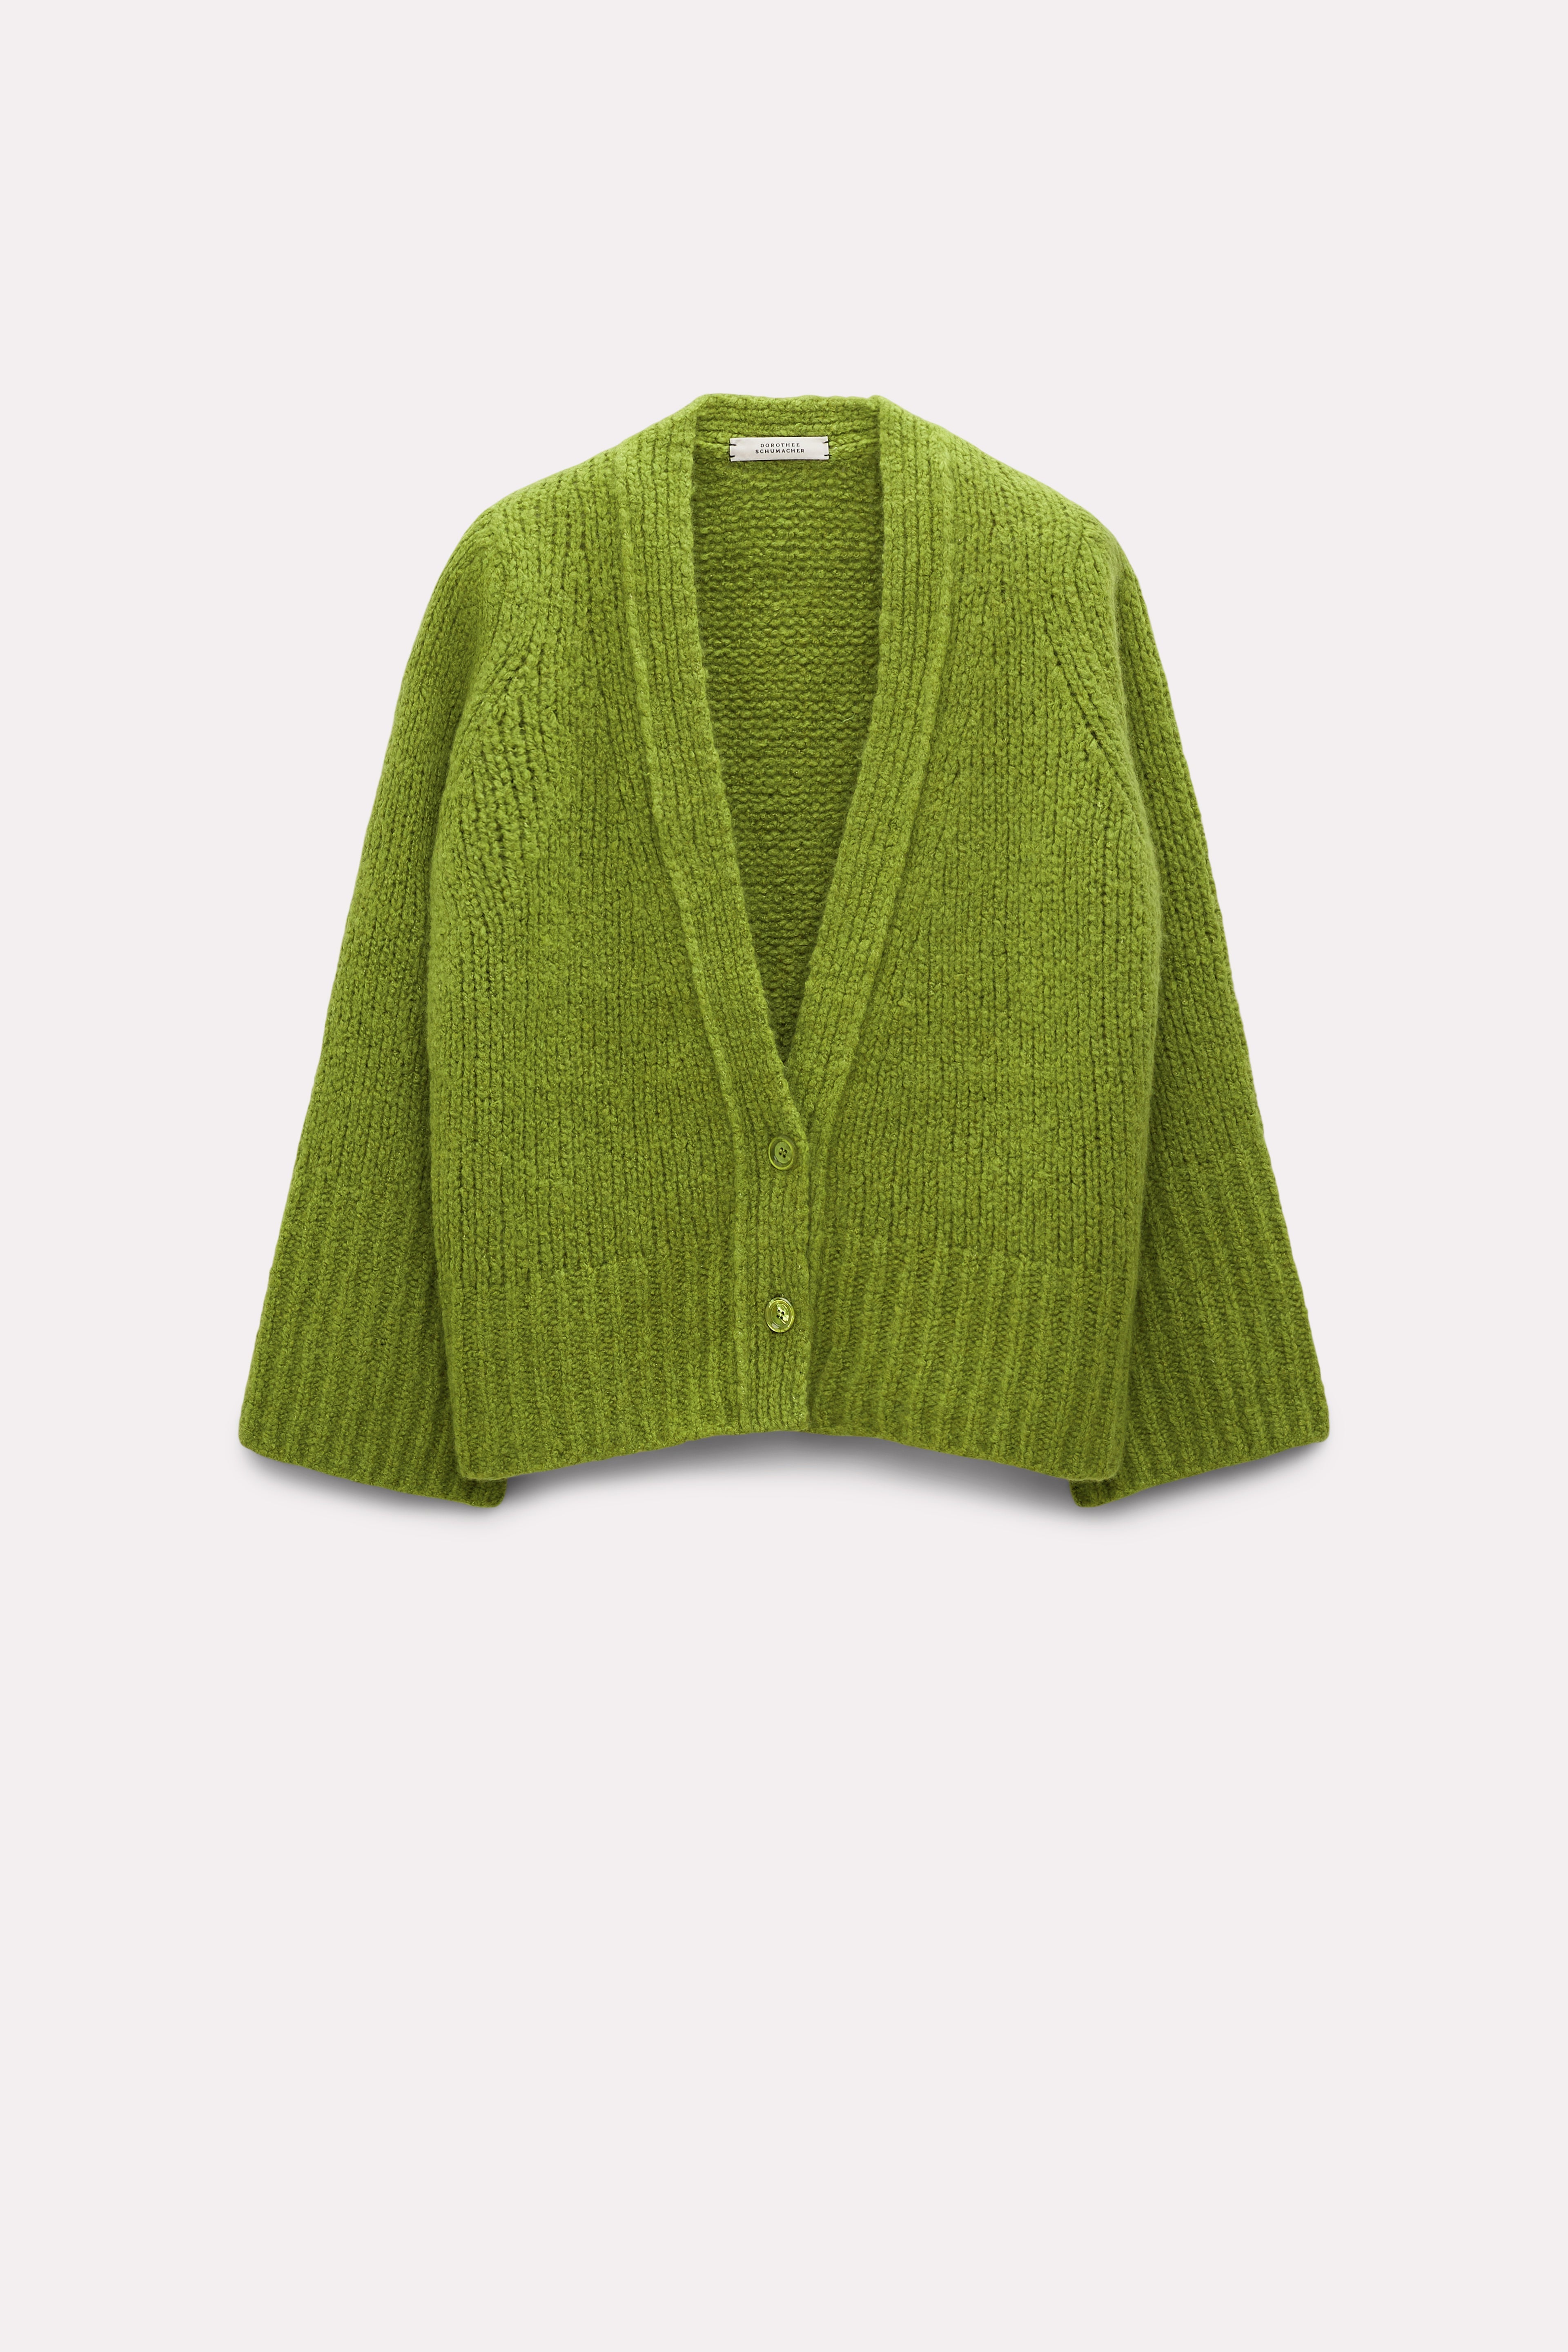 Dorothee-Schumacher-OUTLET-SALE-LUXURY-SOFTNESS-cardigan-Strick-ARCHIVE-COLLECTION.jpg